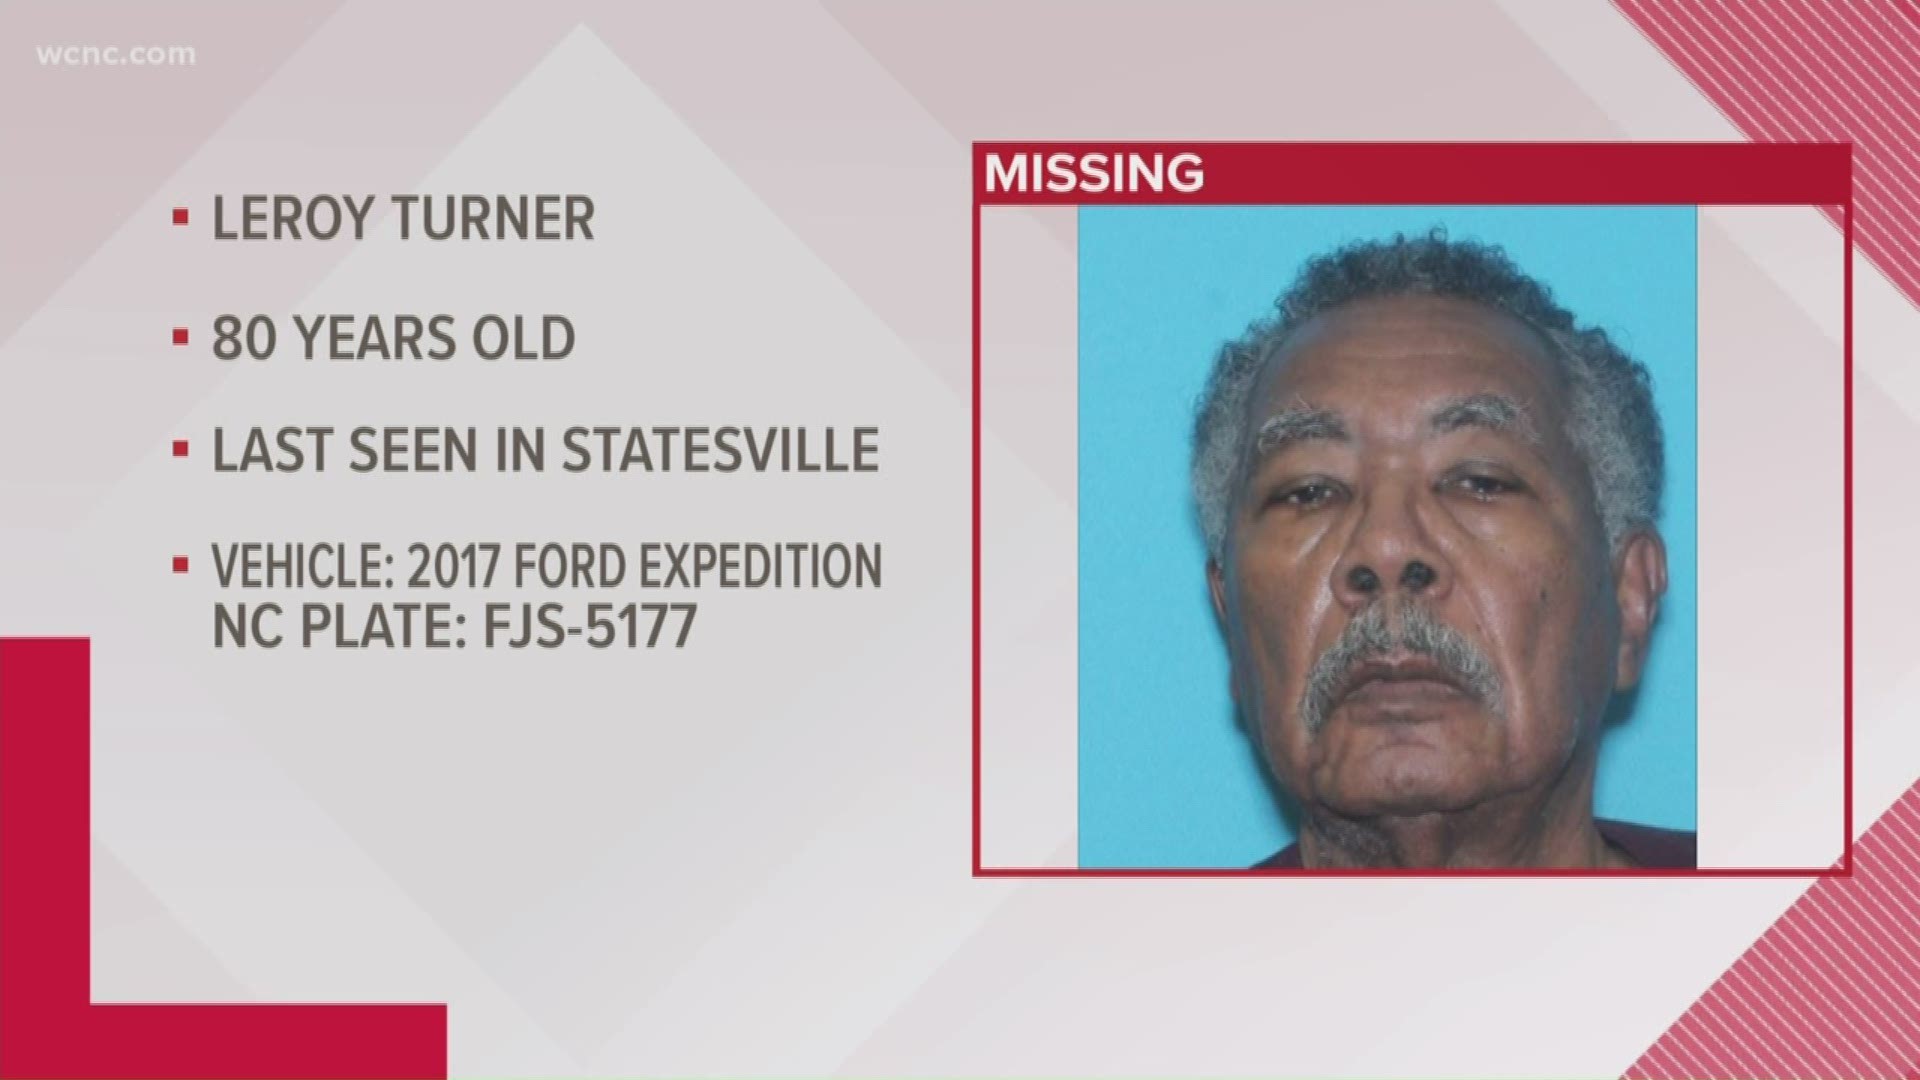 A Silver Alert was issued Wednesday for a missing 80-year-old from Statesville, who may be suffering from dementia or some other cognitive impairment.